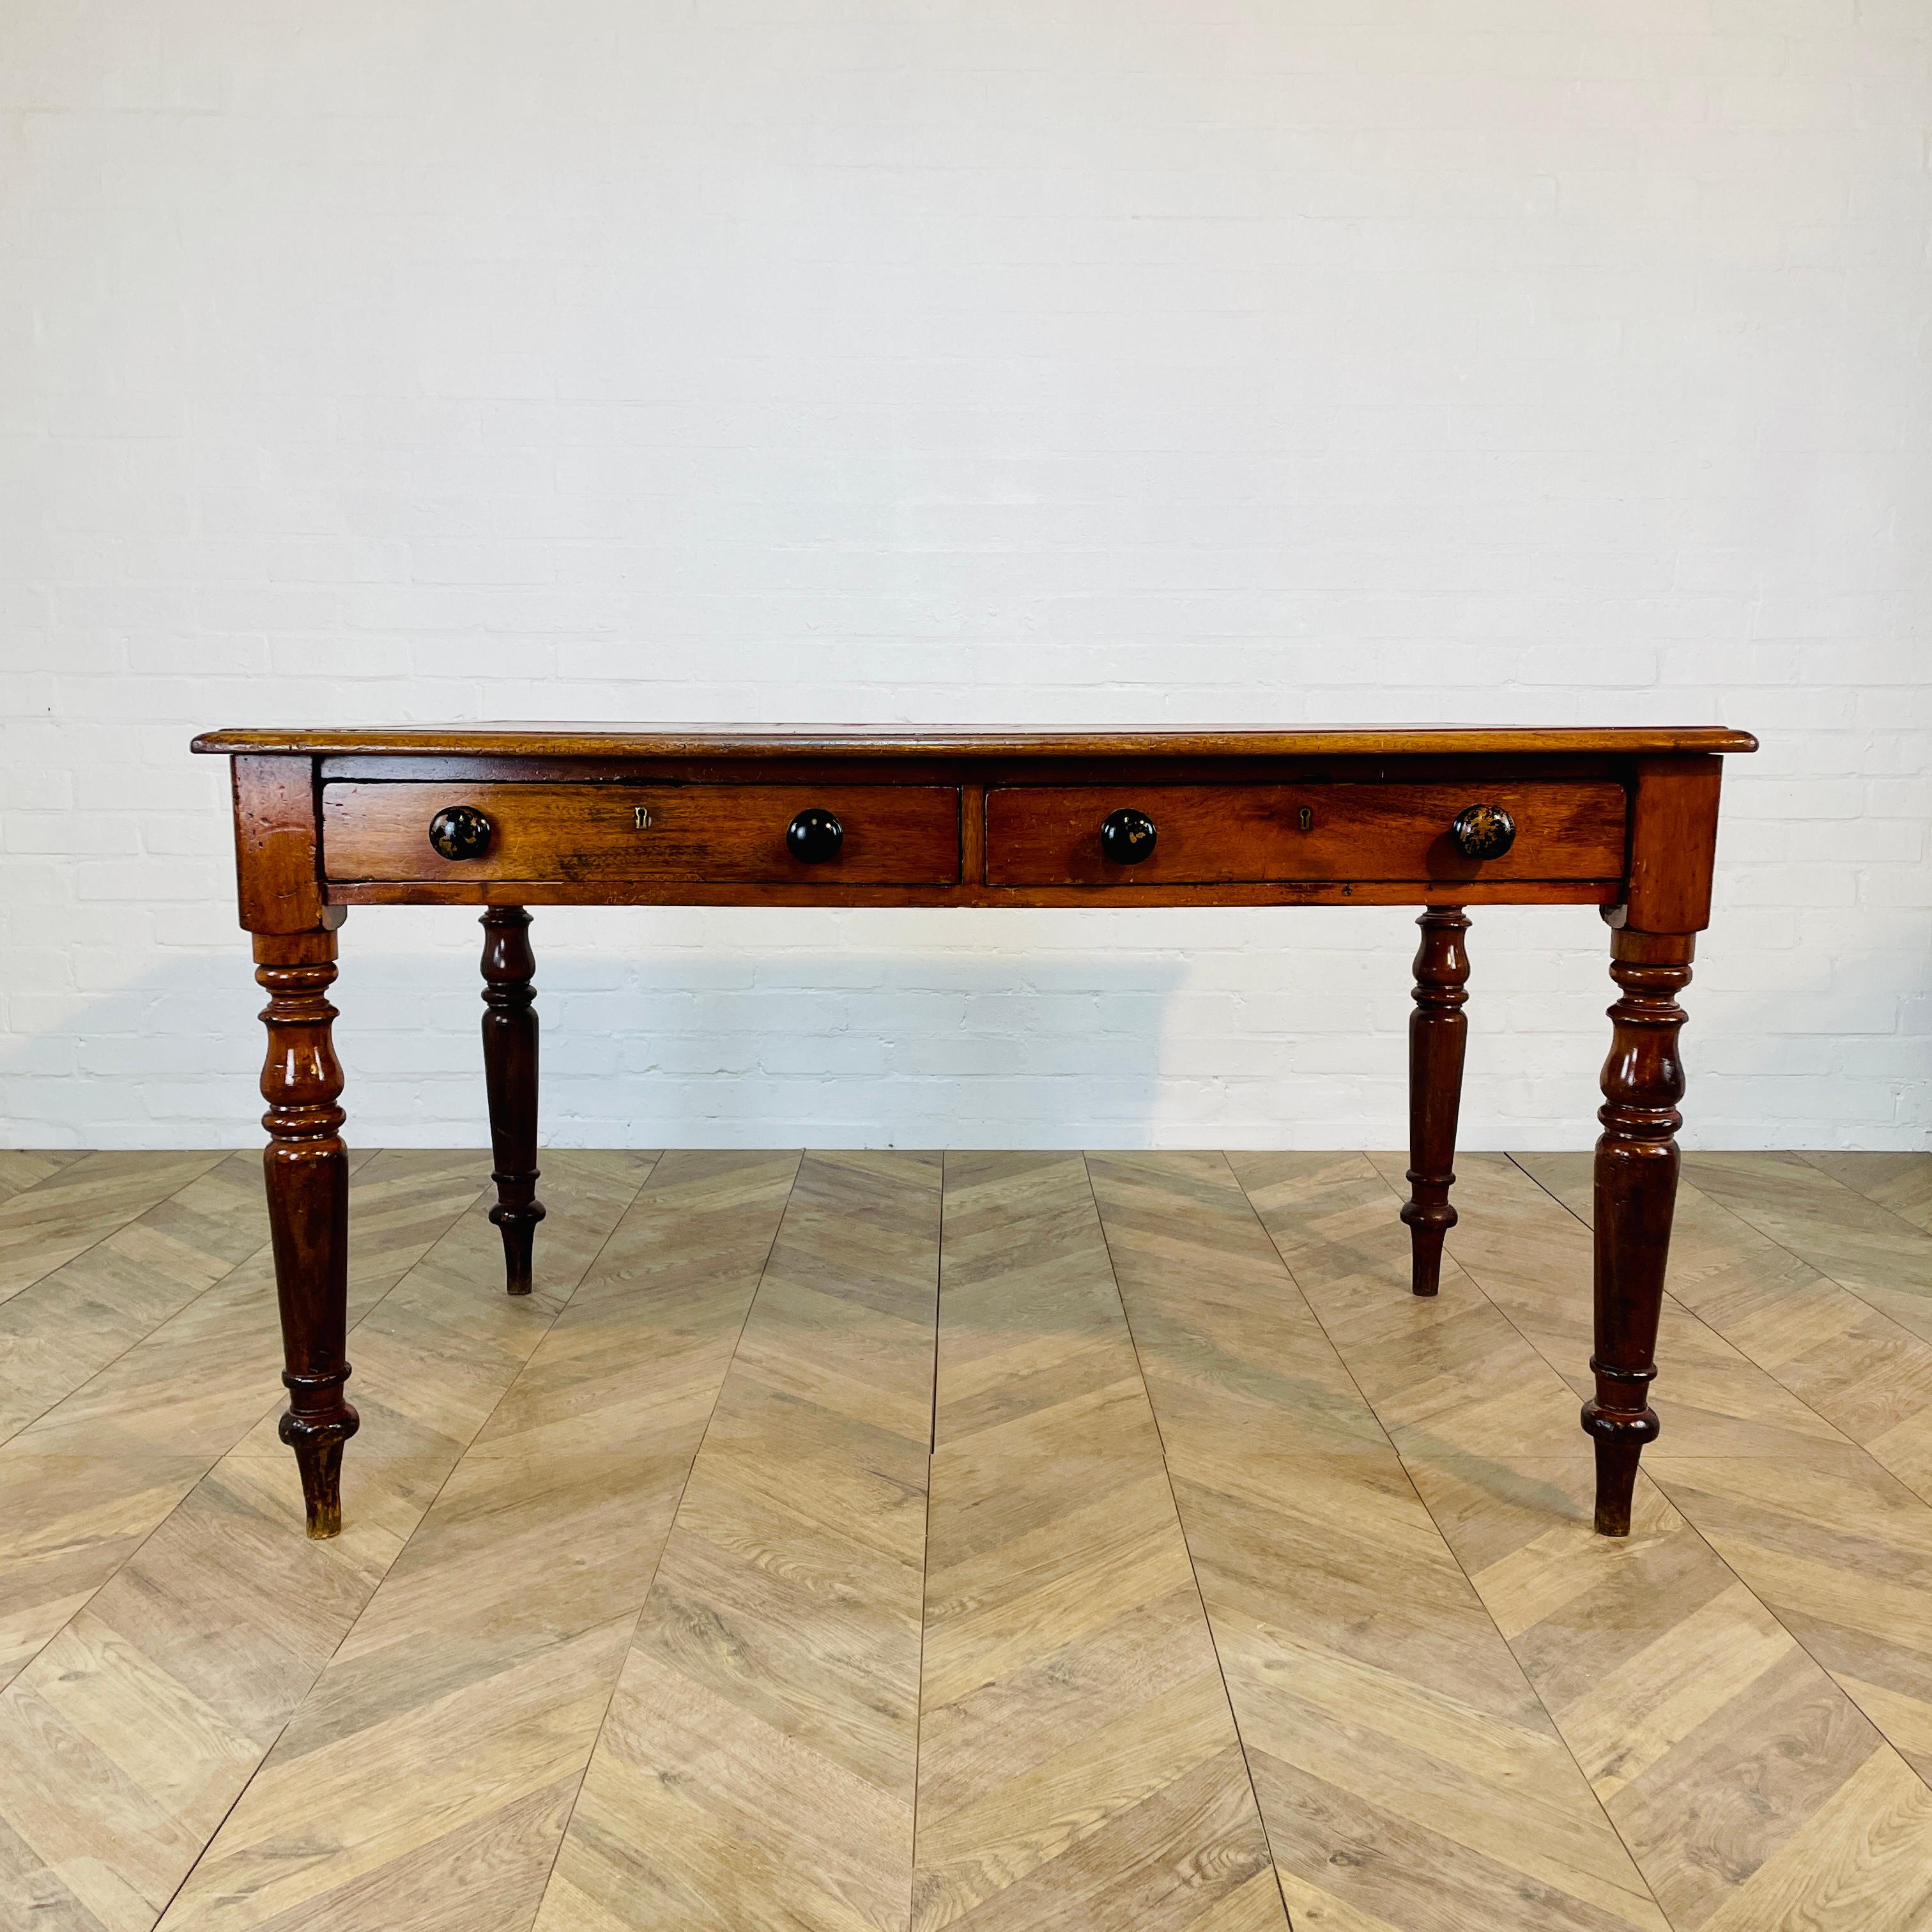 A Beautiful Antique Oak Table with Two Drawers, circa 1890s.

The table originated from the University of Cambridge and was formerly used as a Library table and boasts a red leather top on turned legs.

The table is in good antique condition with